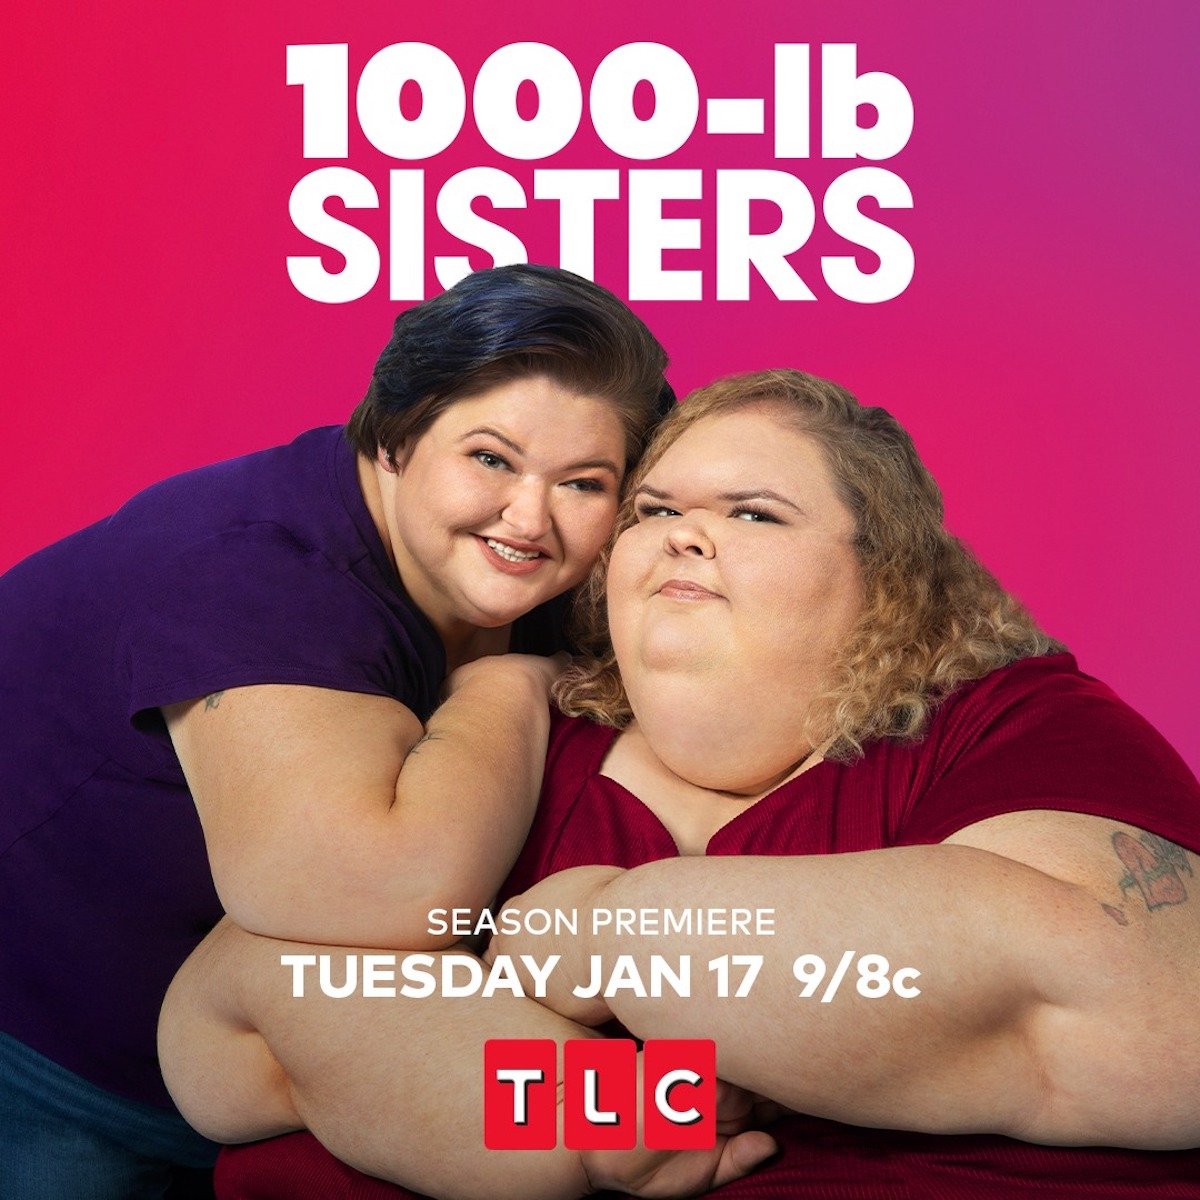 What Time Does ‘1000-lb Sisters’ Come On? Season 4 Watch Guide